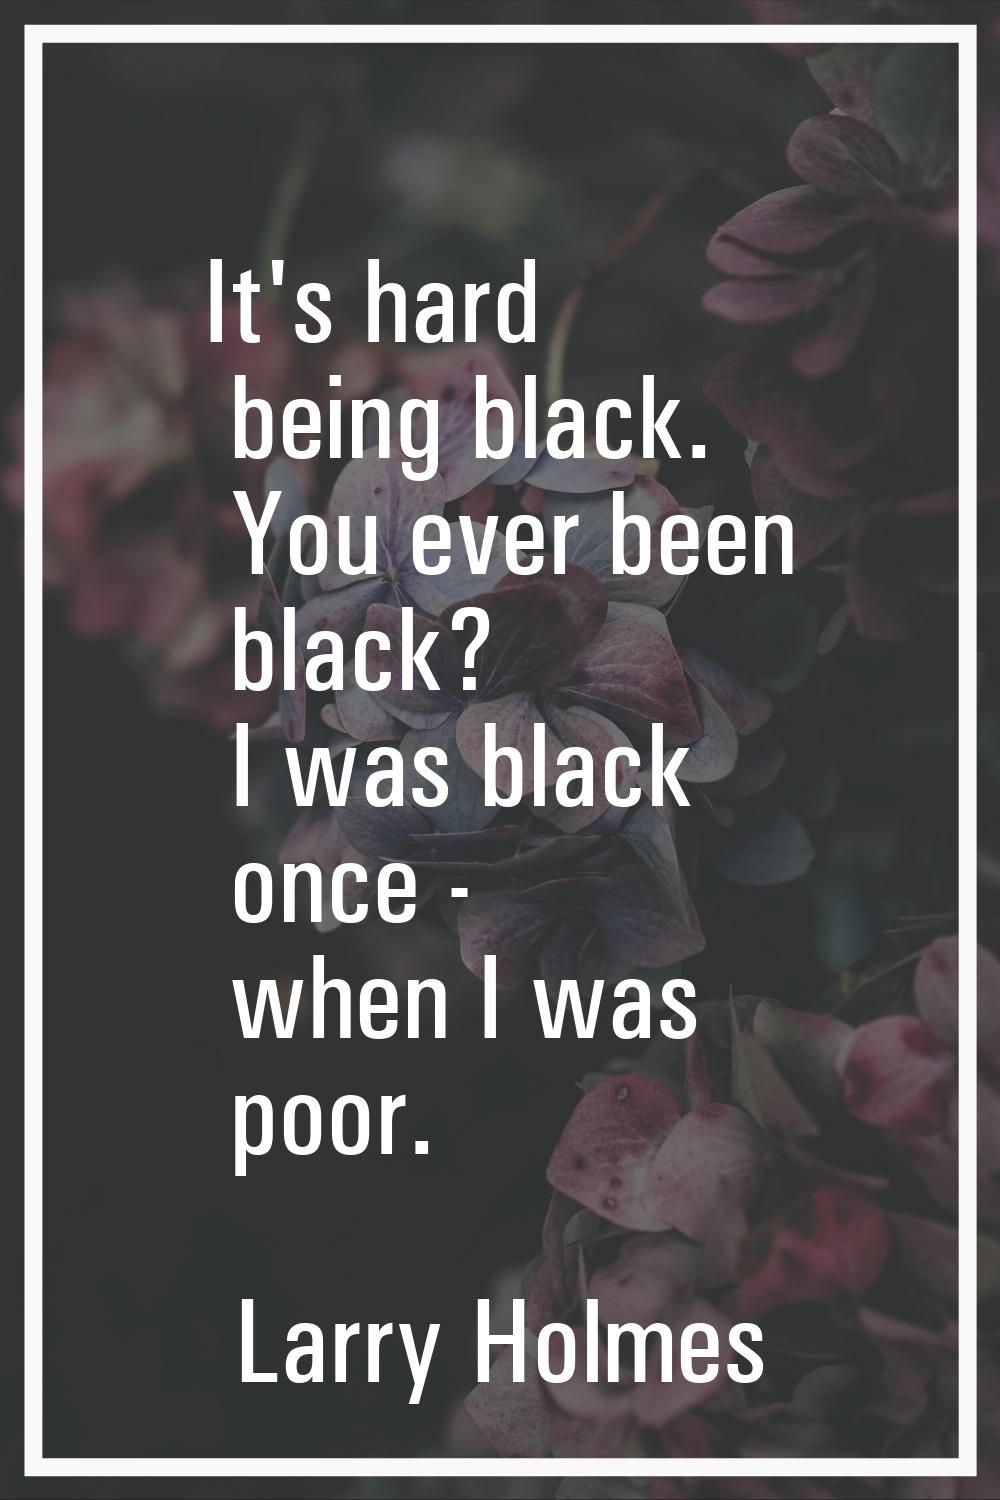 It's hard being black. You ever been black? I was black once - when I was poor.